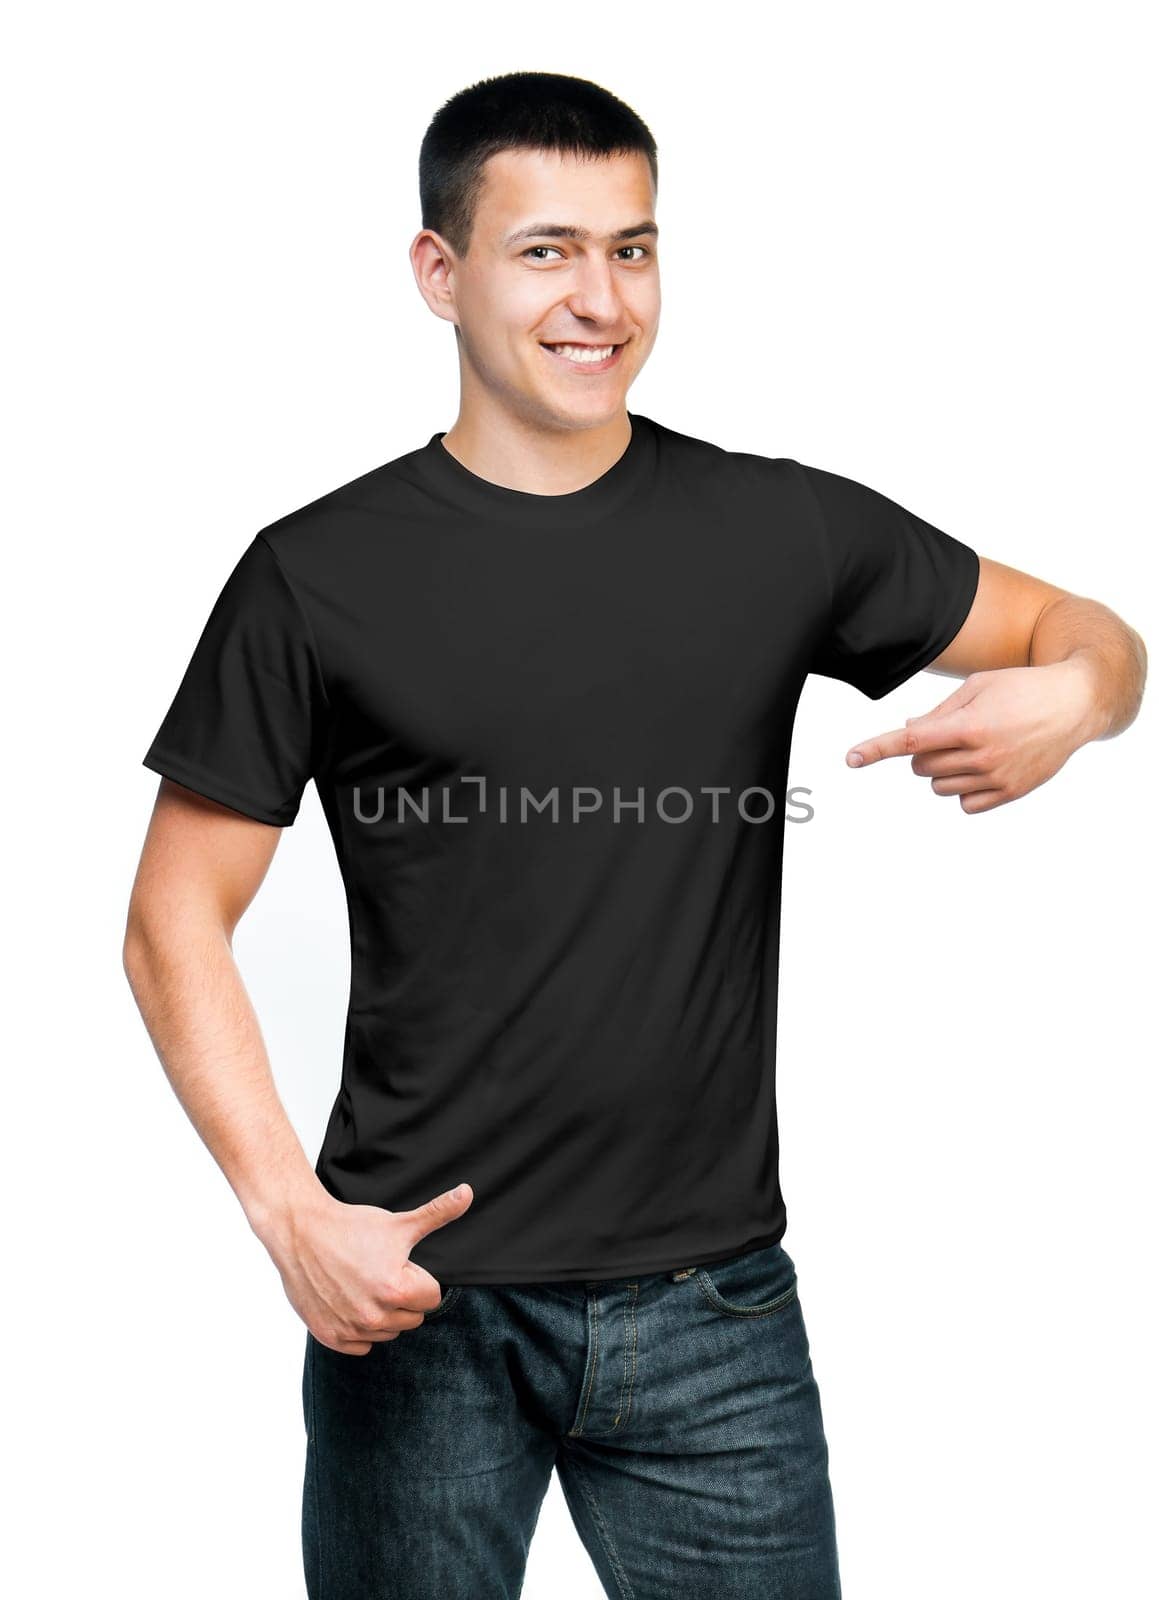 black t-shirt on a young man isolated. Ready for your design